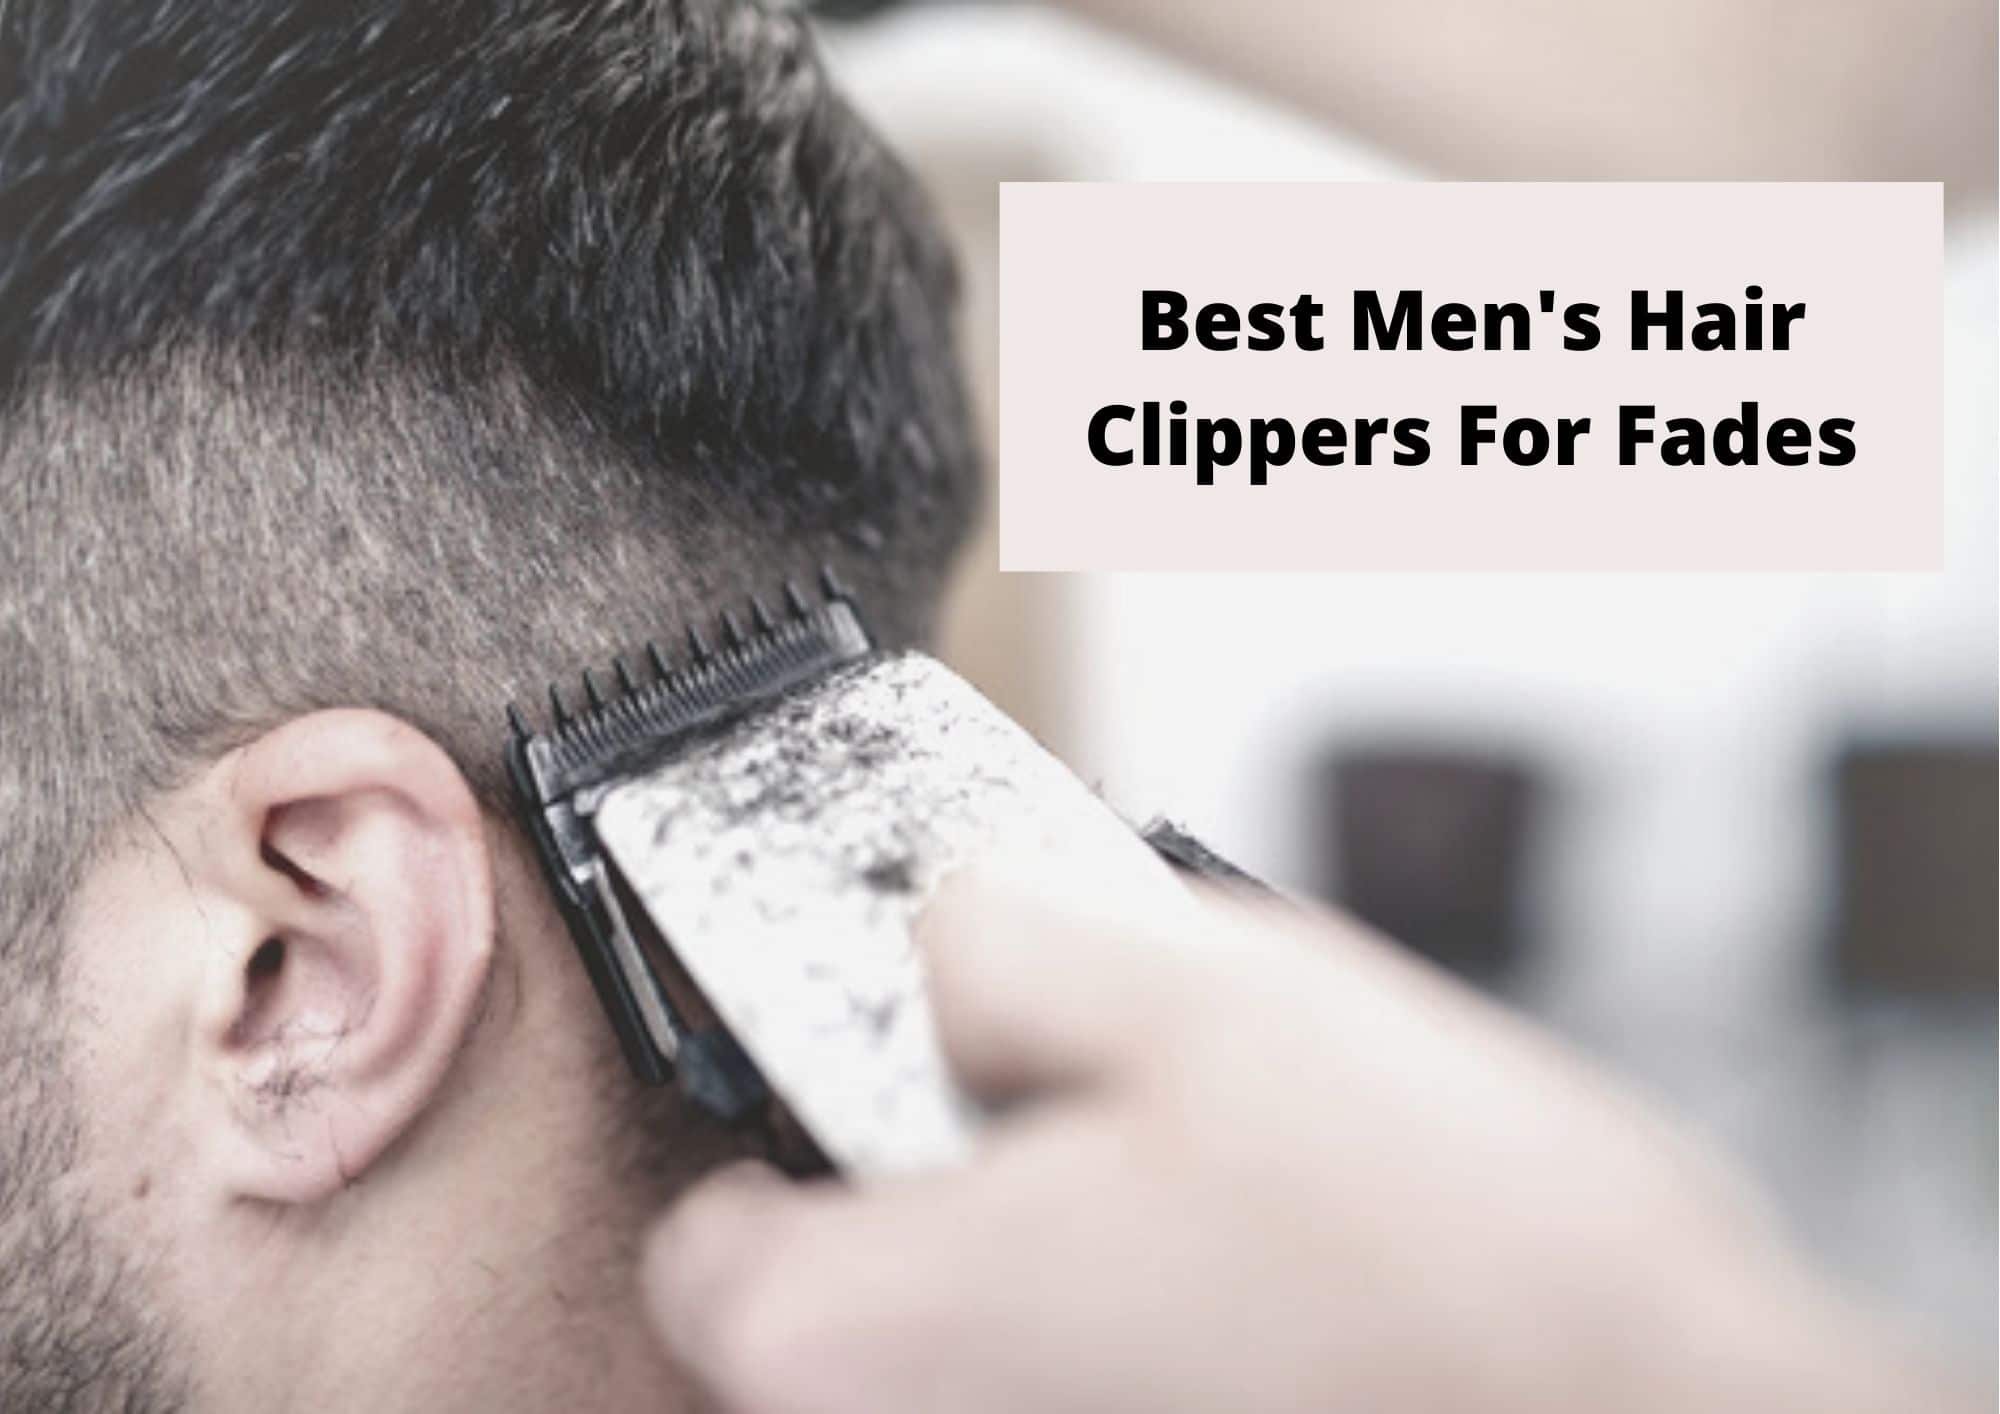 10 Best Hair Clipper For Fades 2023 - Hair Everyday Review